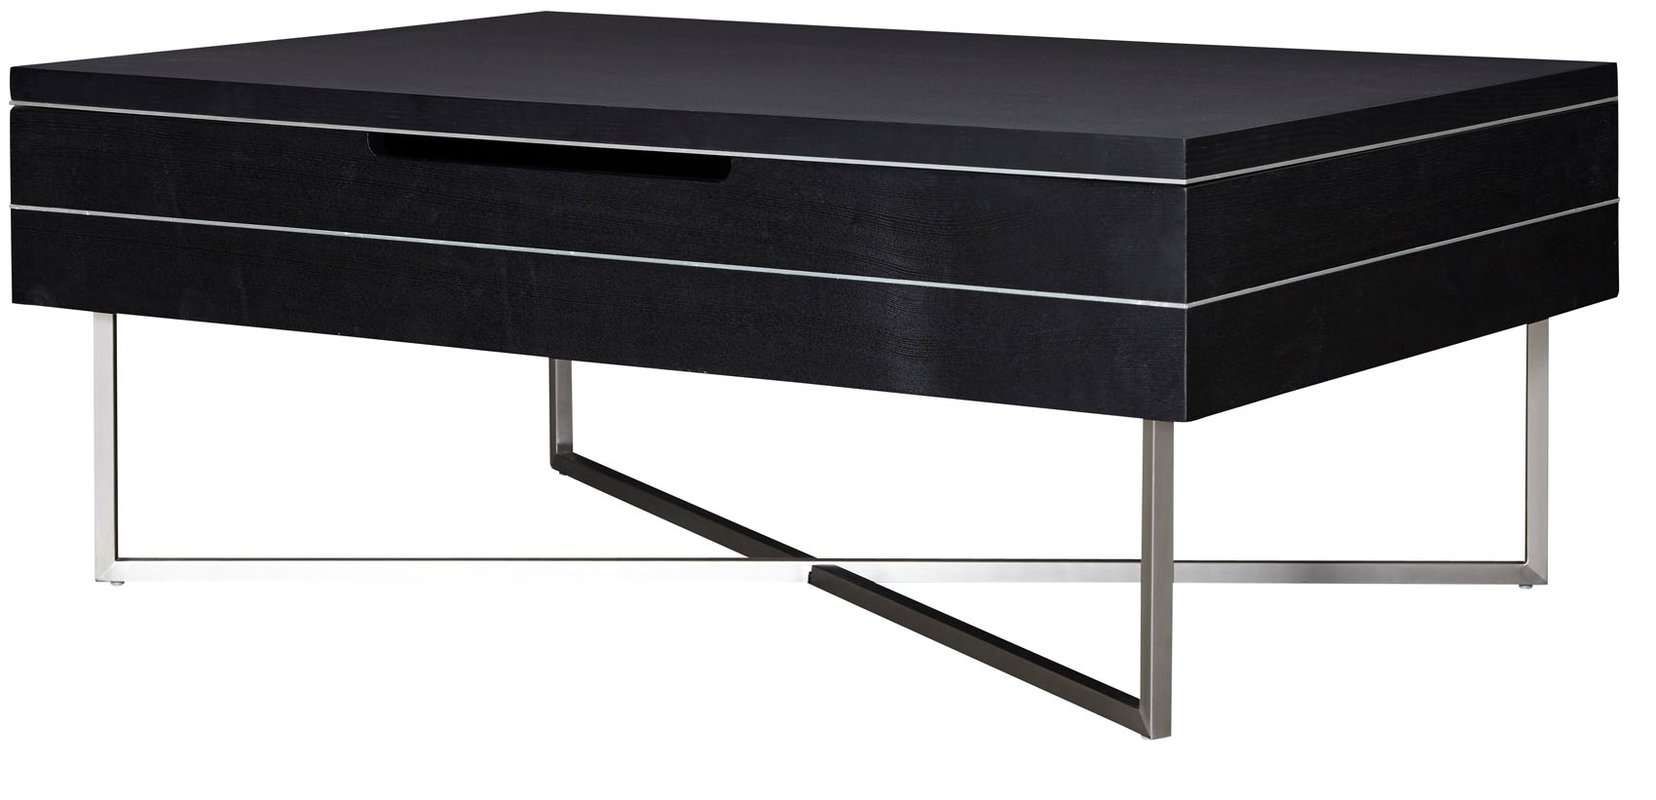 Current Logan Lift Top Coffee Tables Throughout Wade Logan Vera Rectangular Lift Top Coffee Table & Reviews (View 8 of 20)